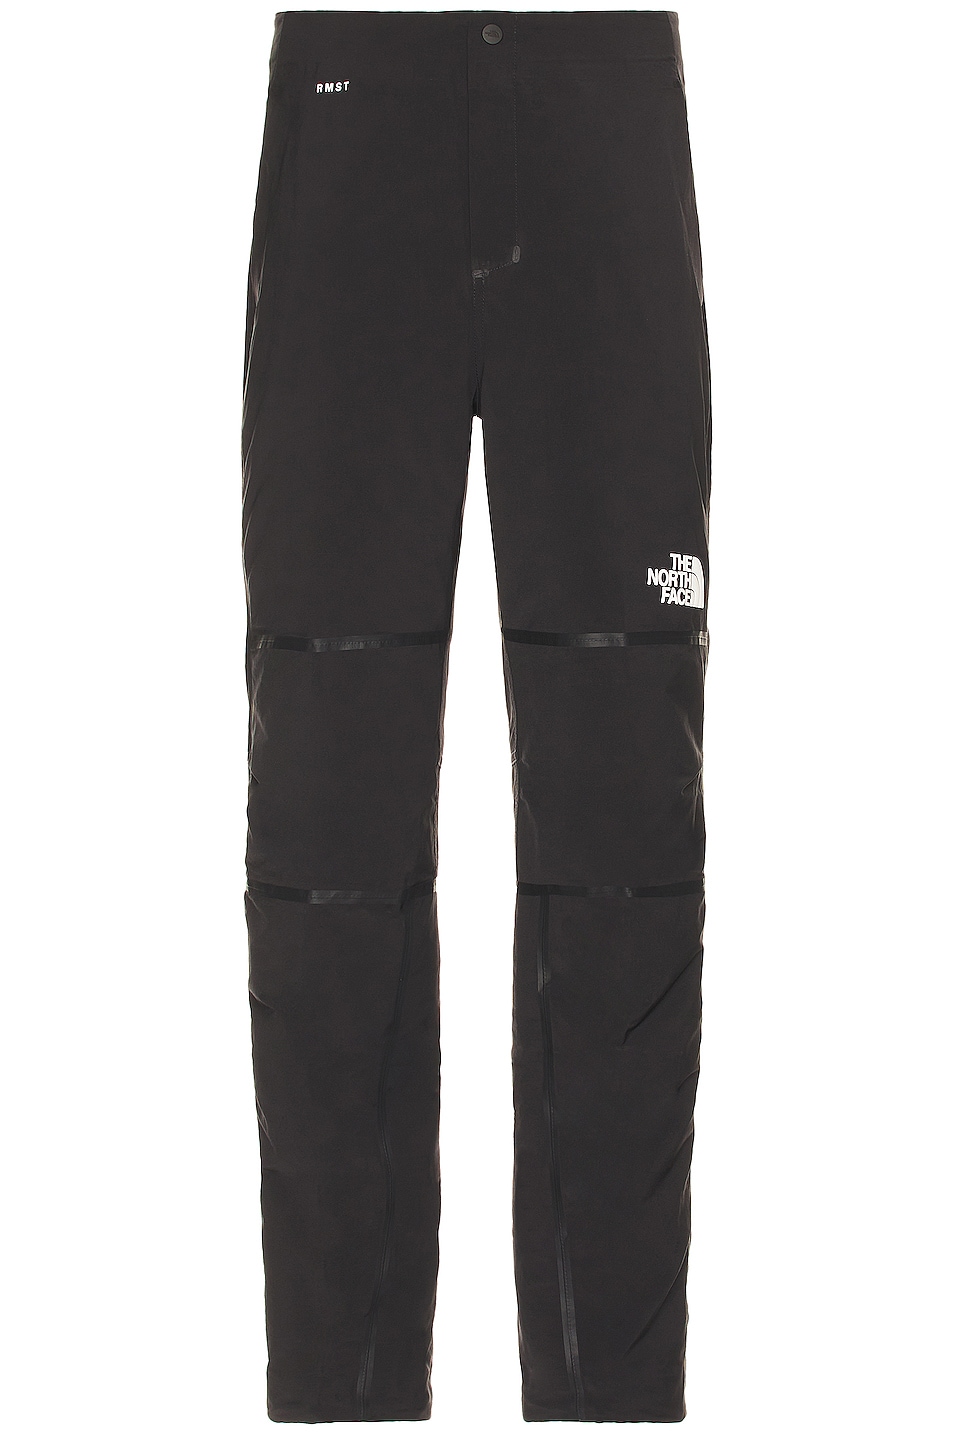 Image 1 of The North Face RMST Mountain Straight Pant in TNF Black